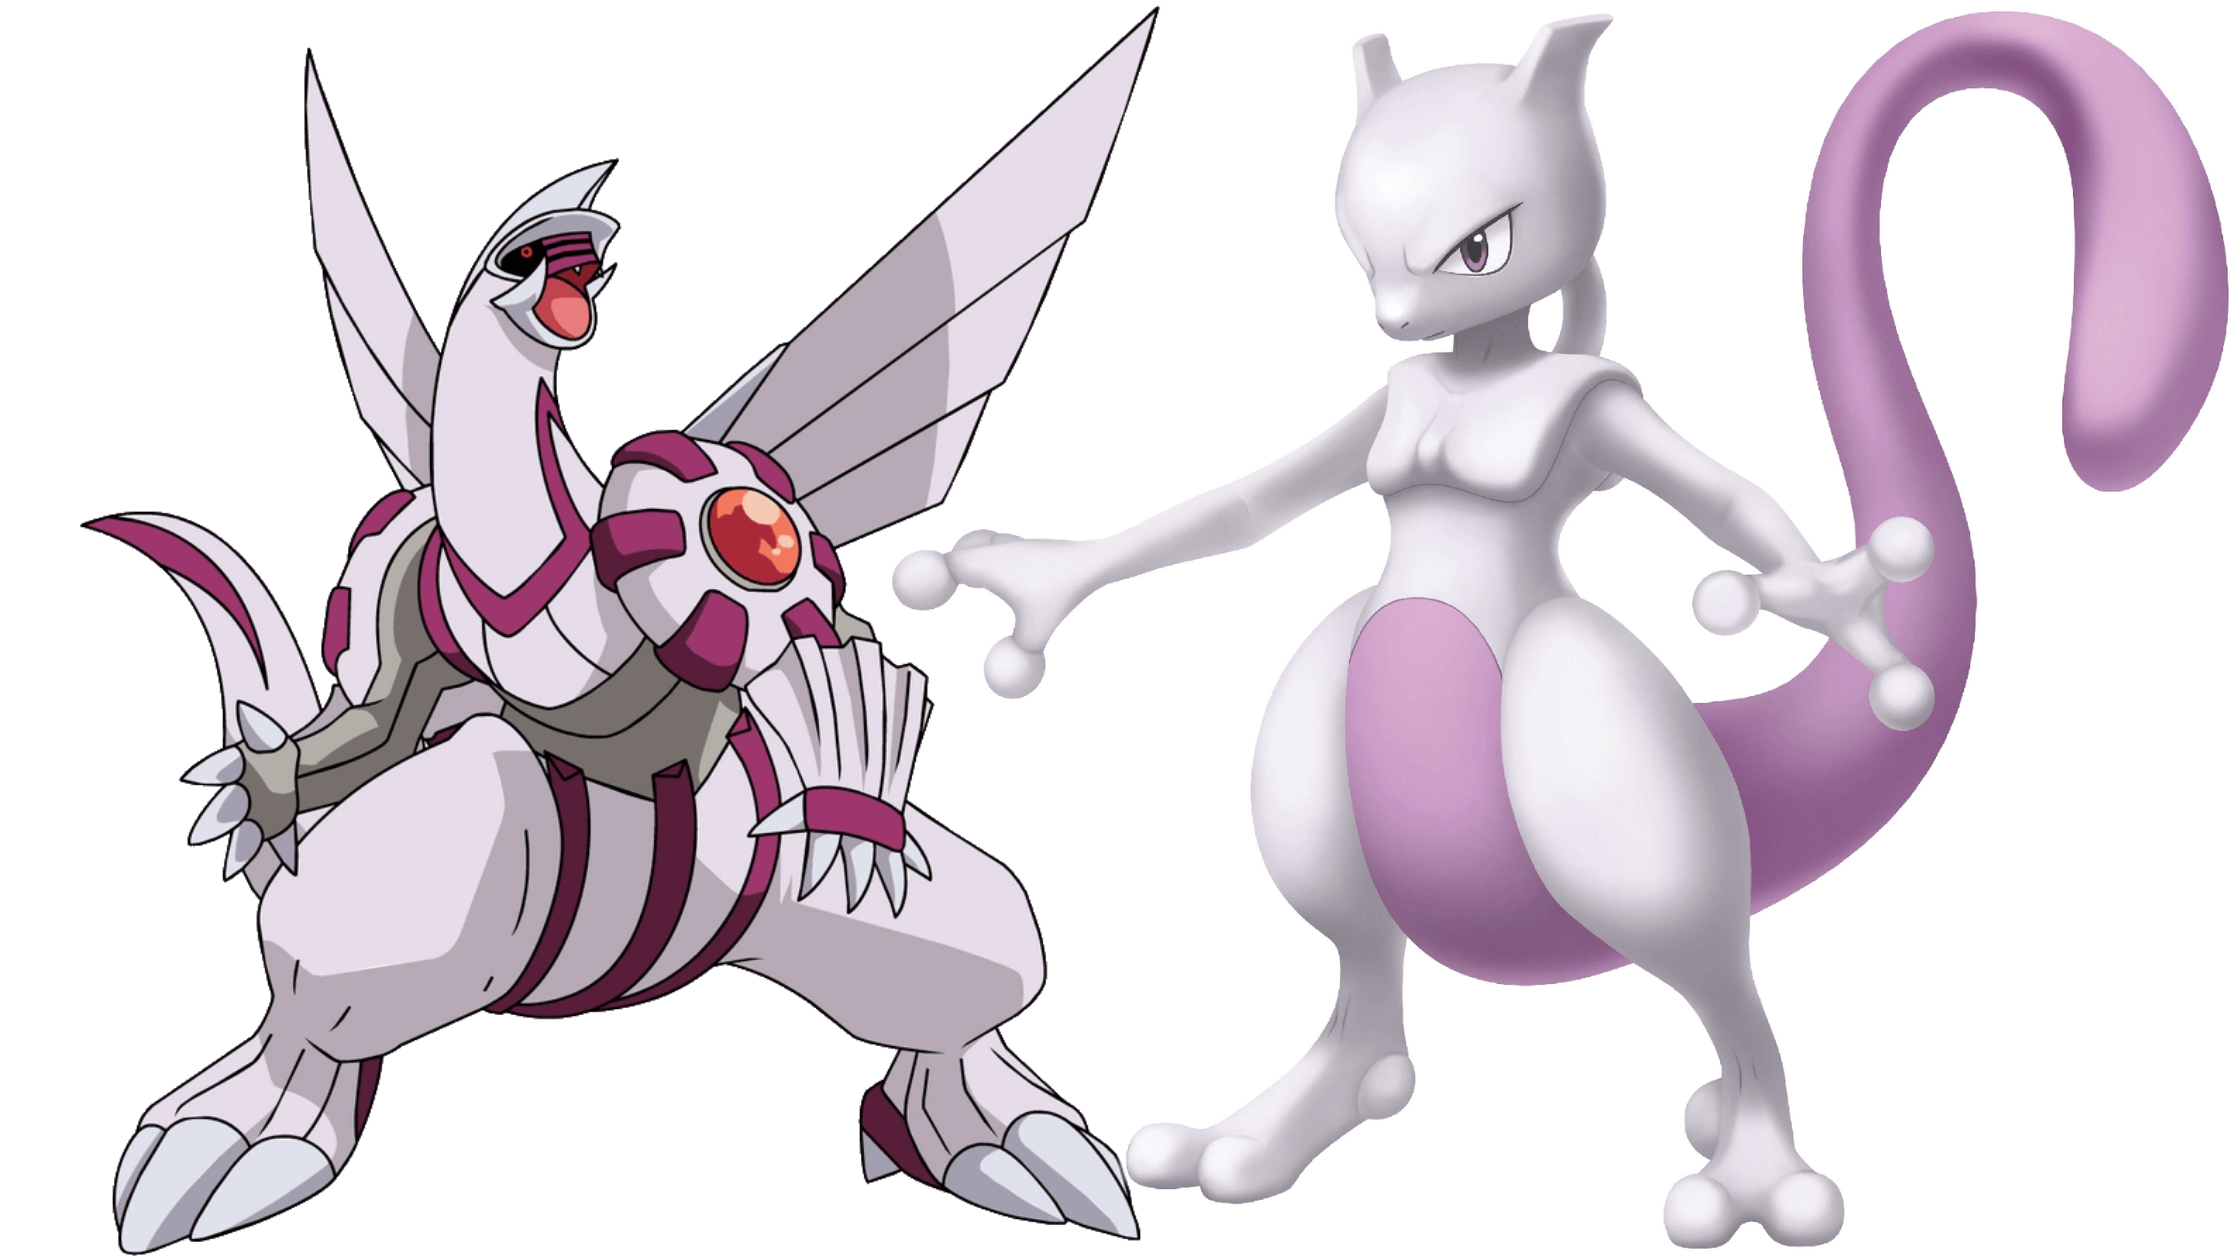 15 Most Powerful and Strongest Pokemon! Most-Talked All-Time Favorites